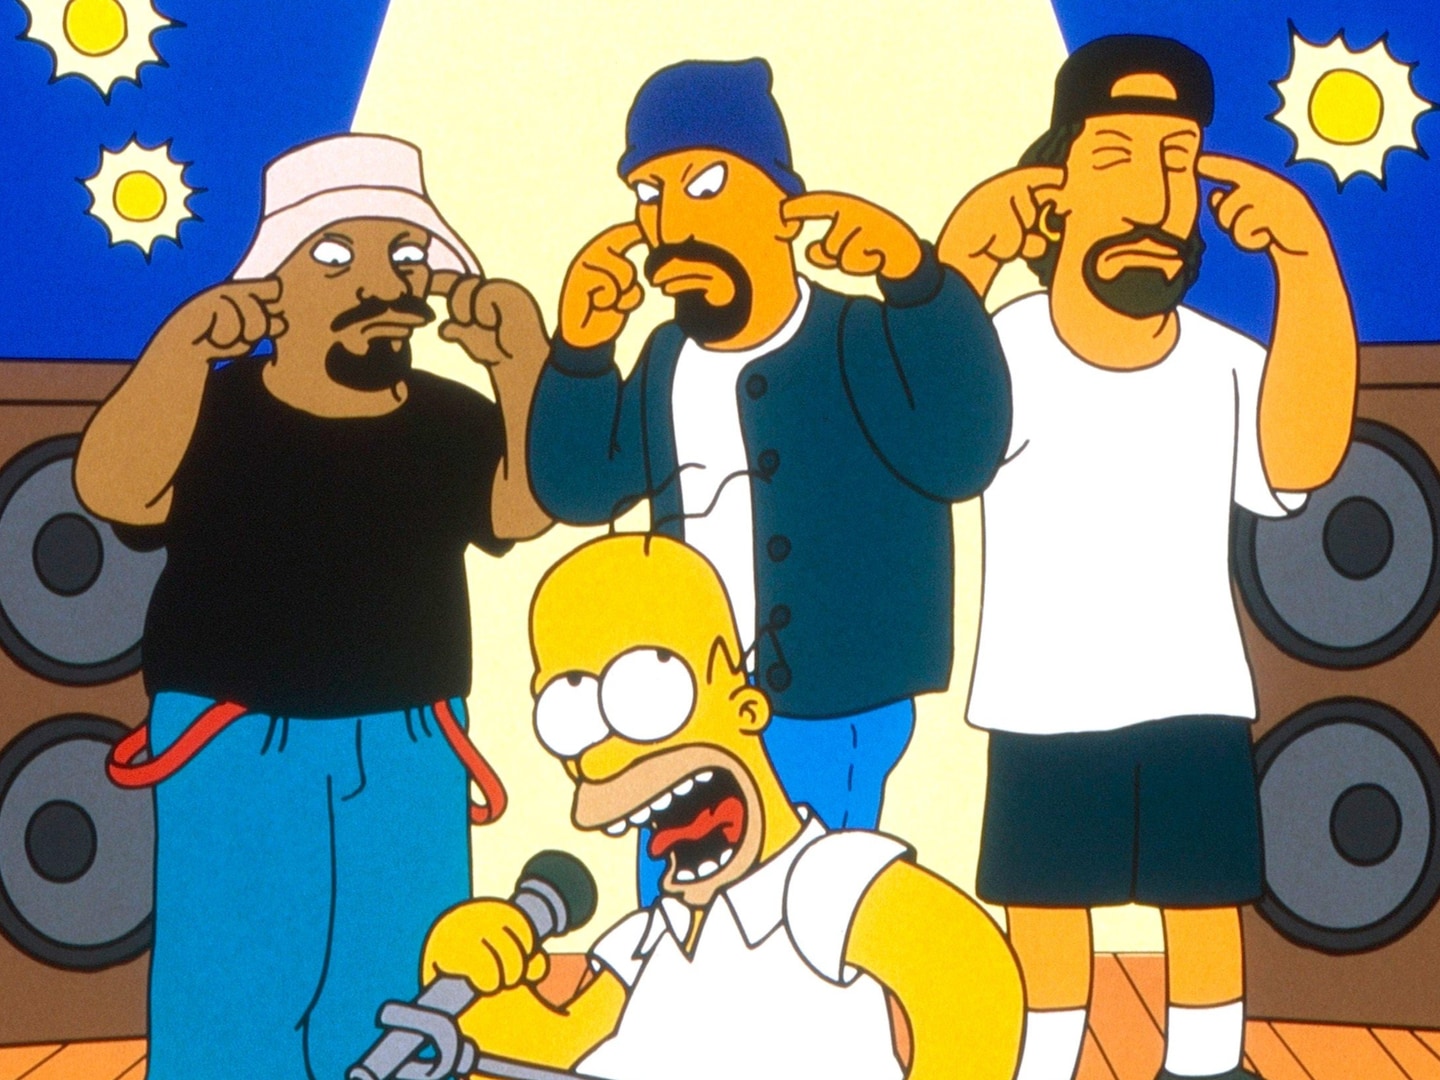 ‘The Simpsons’ inspires Cypress Hill, London Symphony Orchestra performance